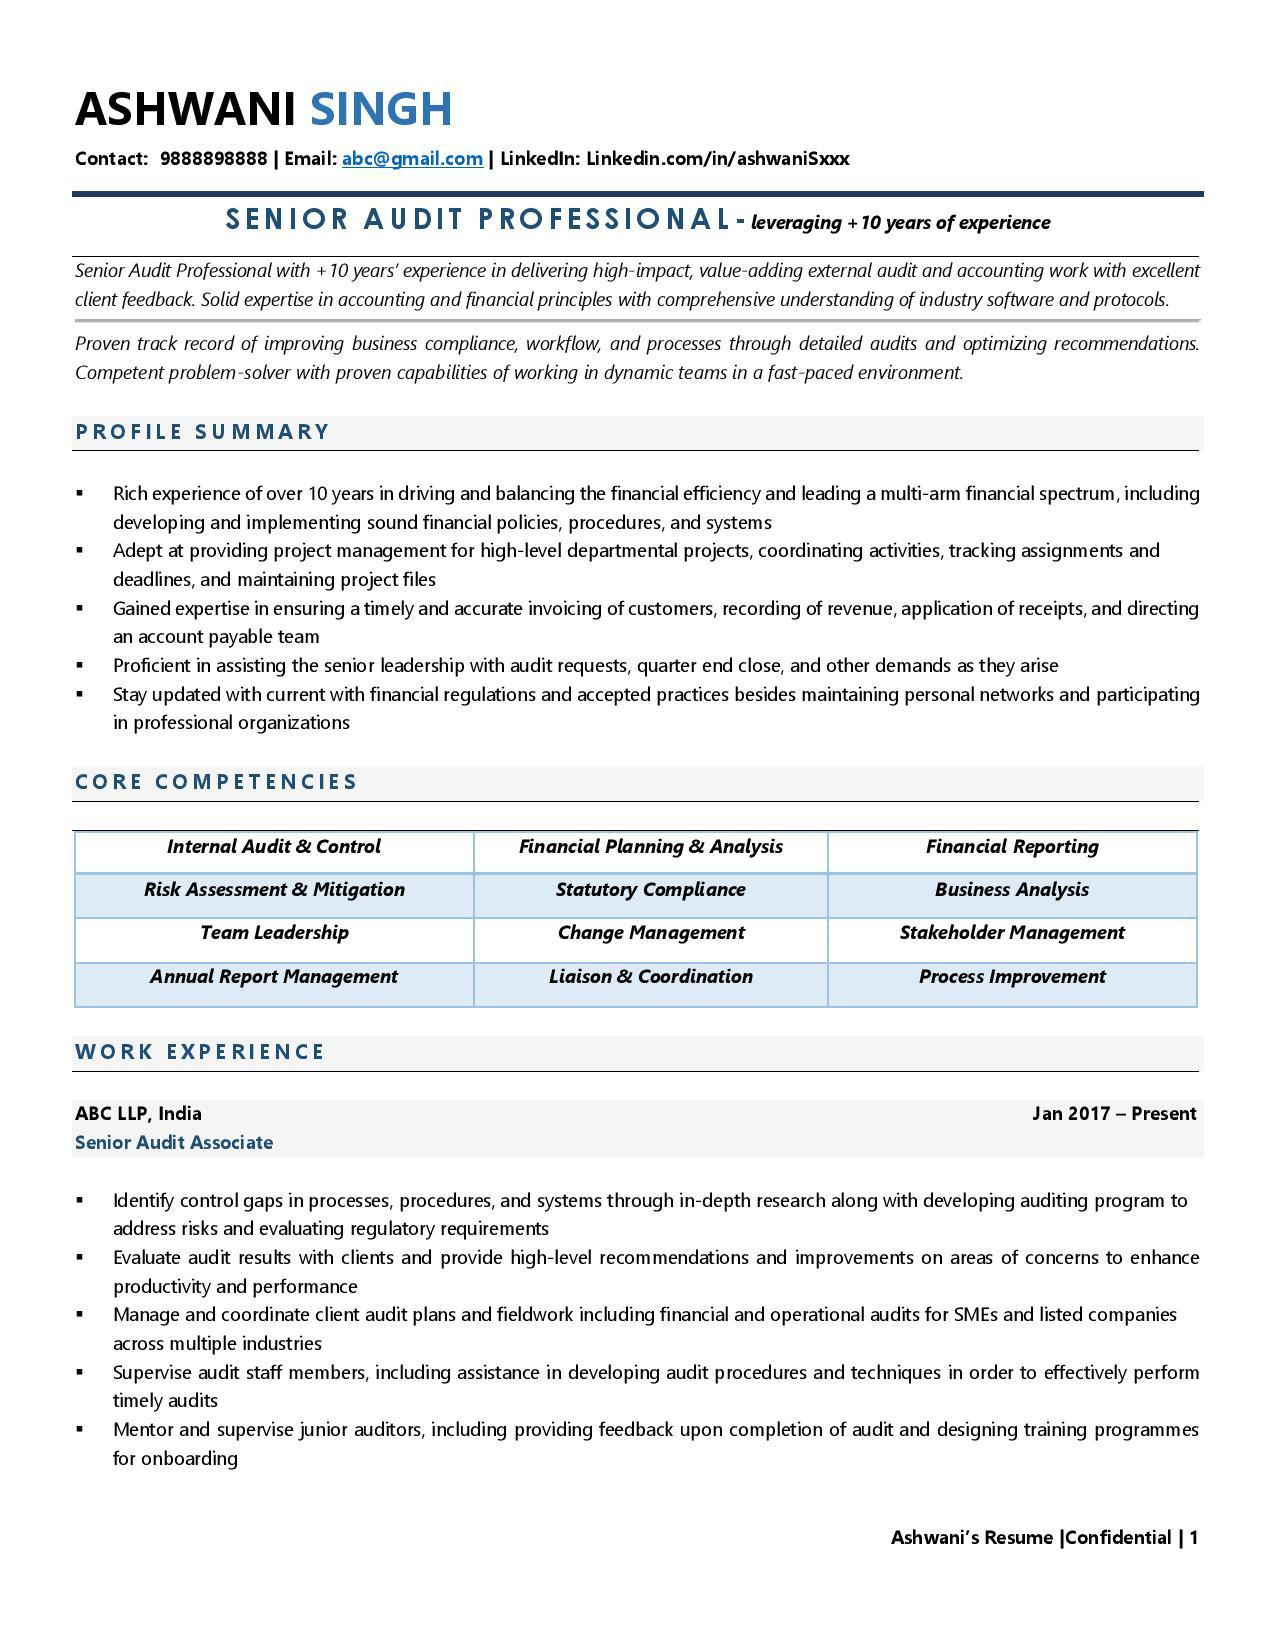 Senior Audit Readiness Consultant Resume Sample Auditor Resume Examples & Template (with Job Winning Tips)